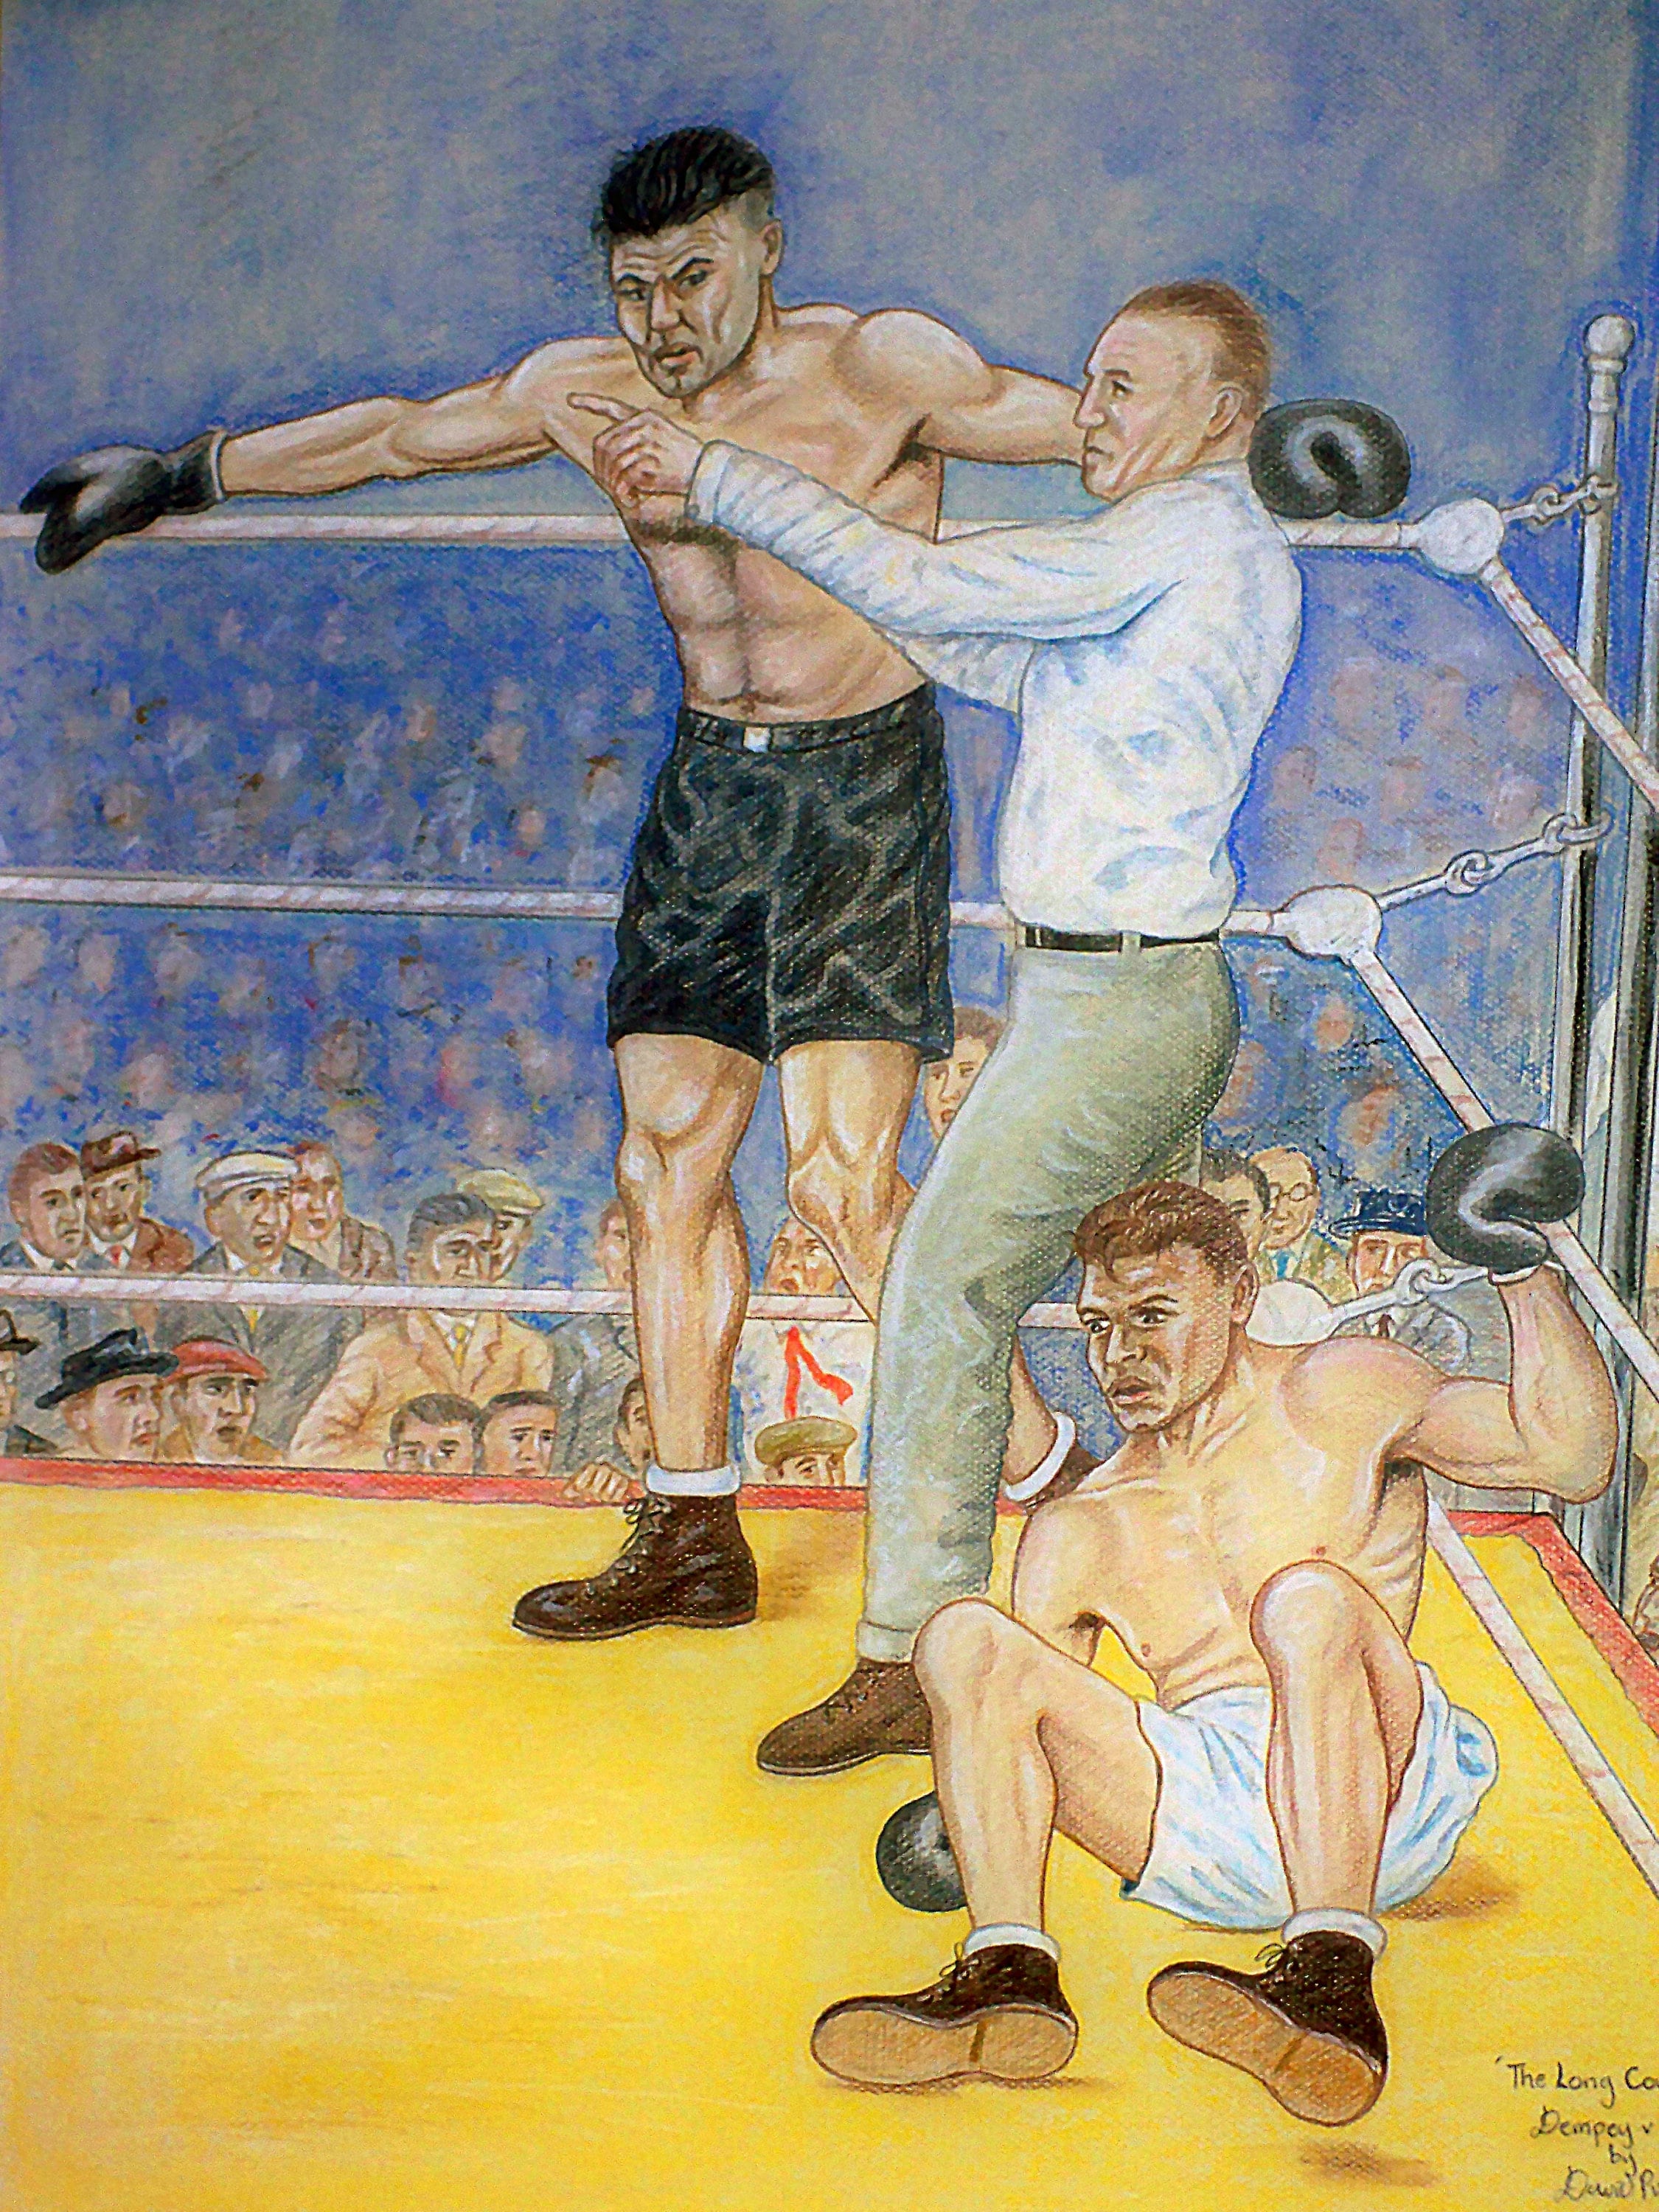 Jack Dempsey V Gene Tunney the Long Count